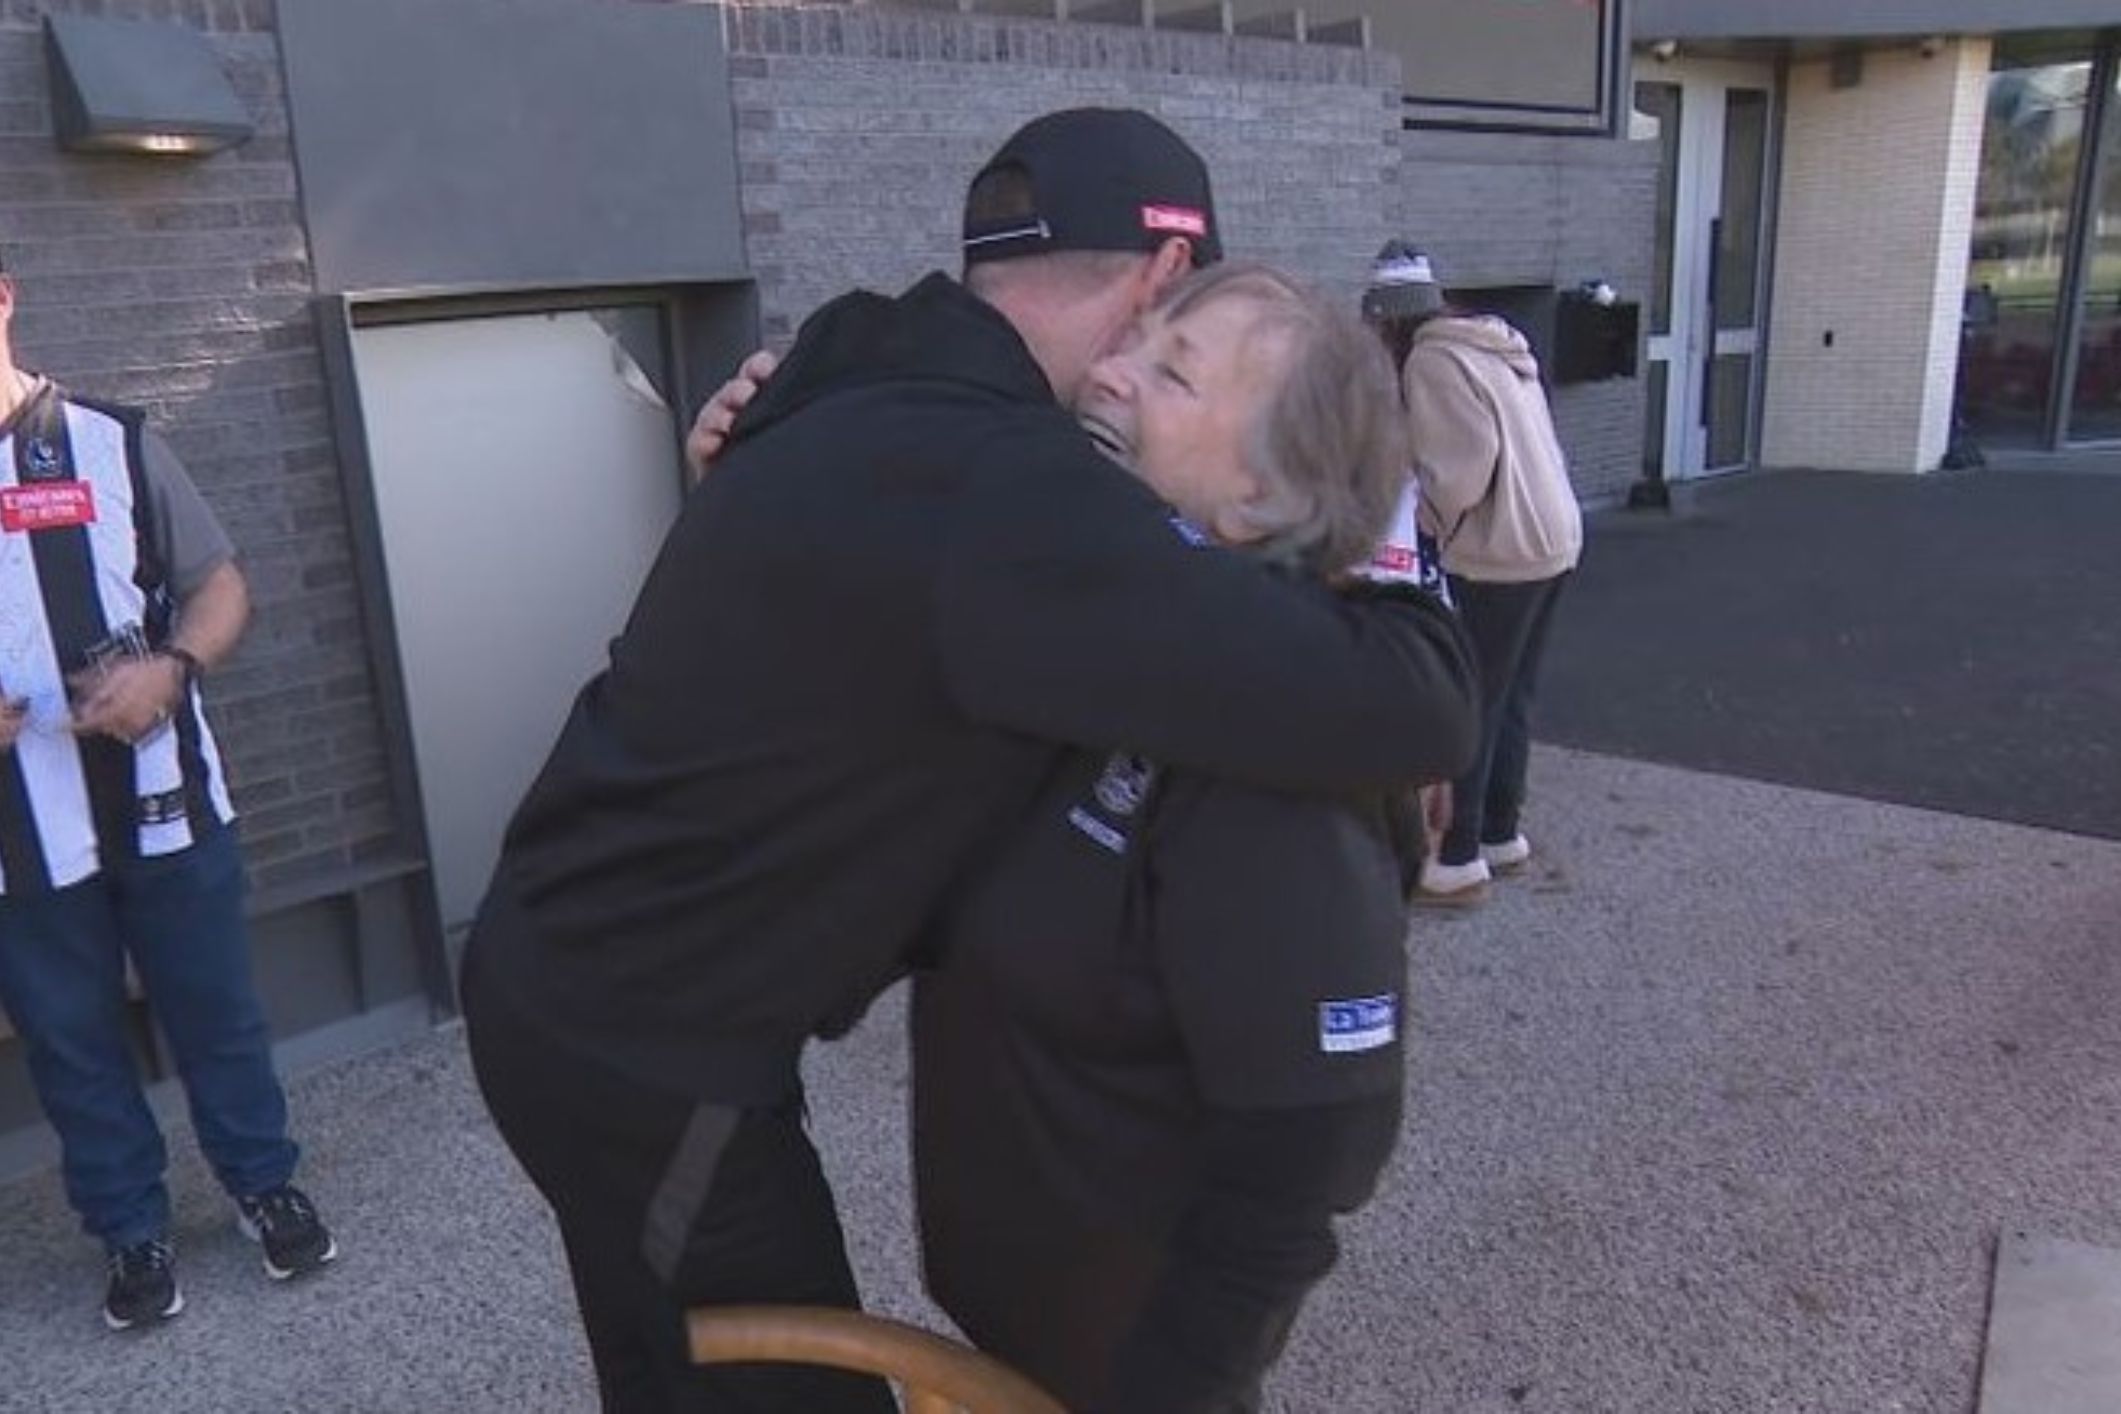 Great-grandmother Finds Comfort in Magpies' Embrace After E-Scooter Attack